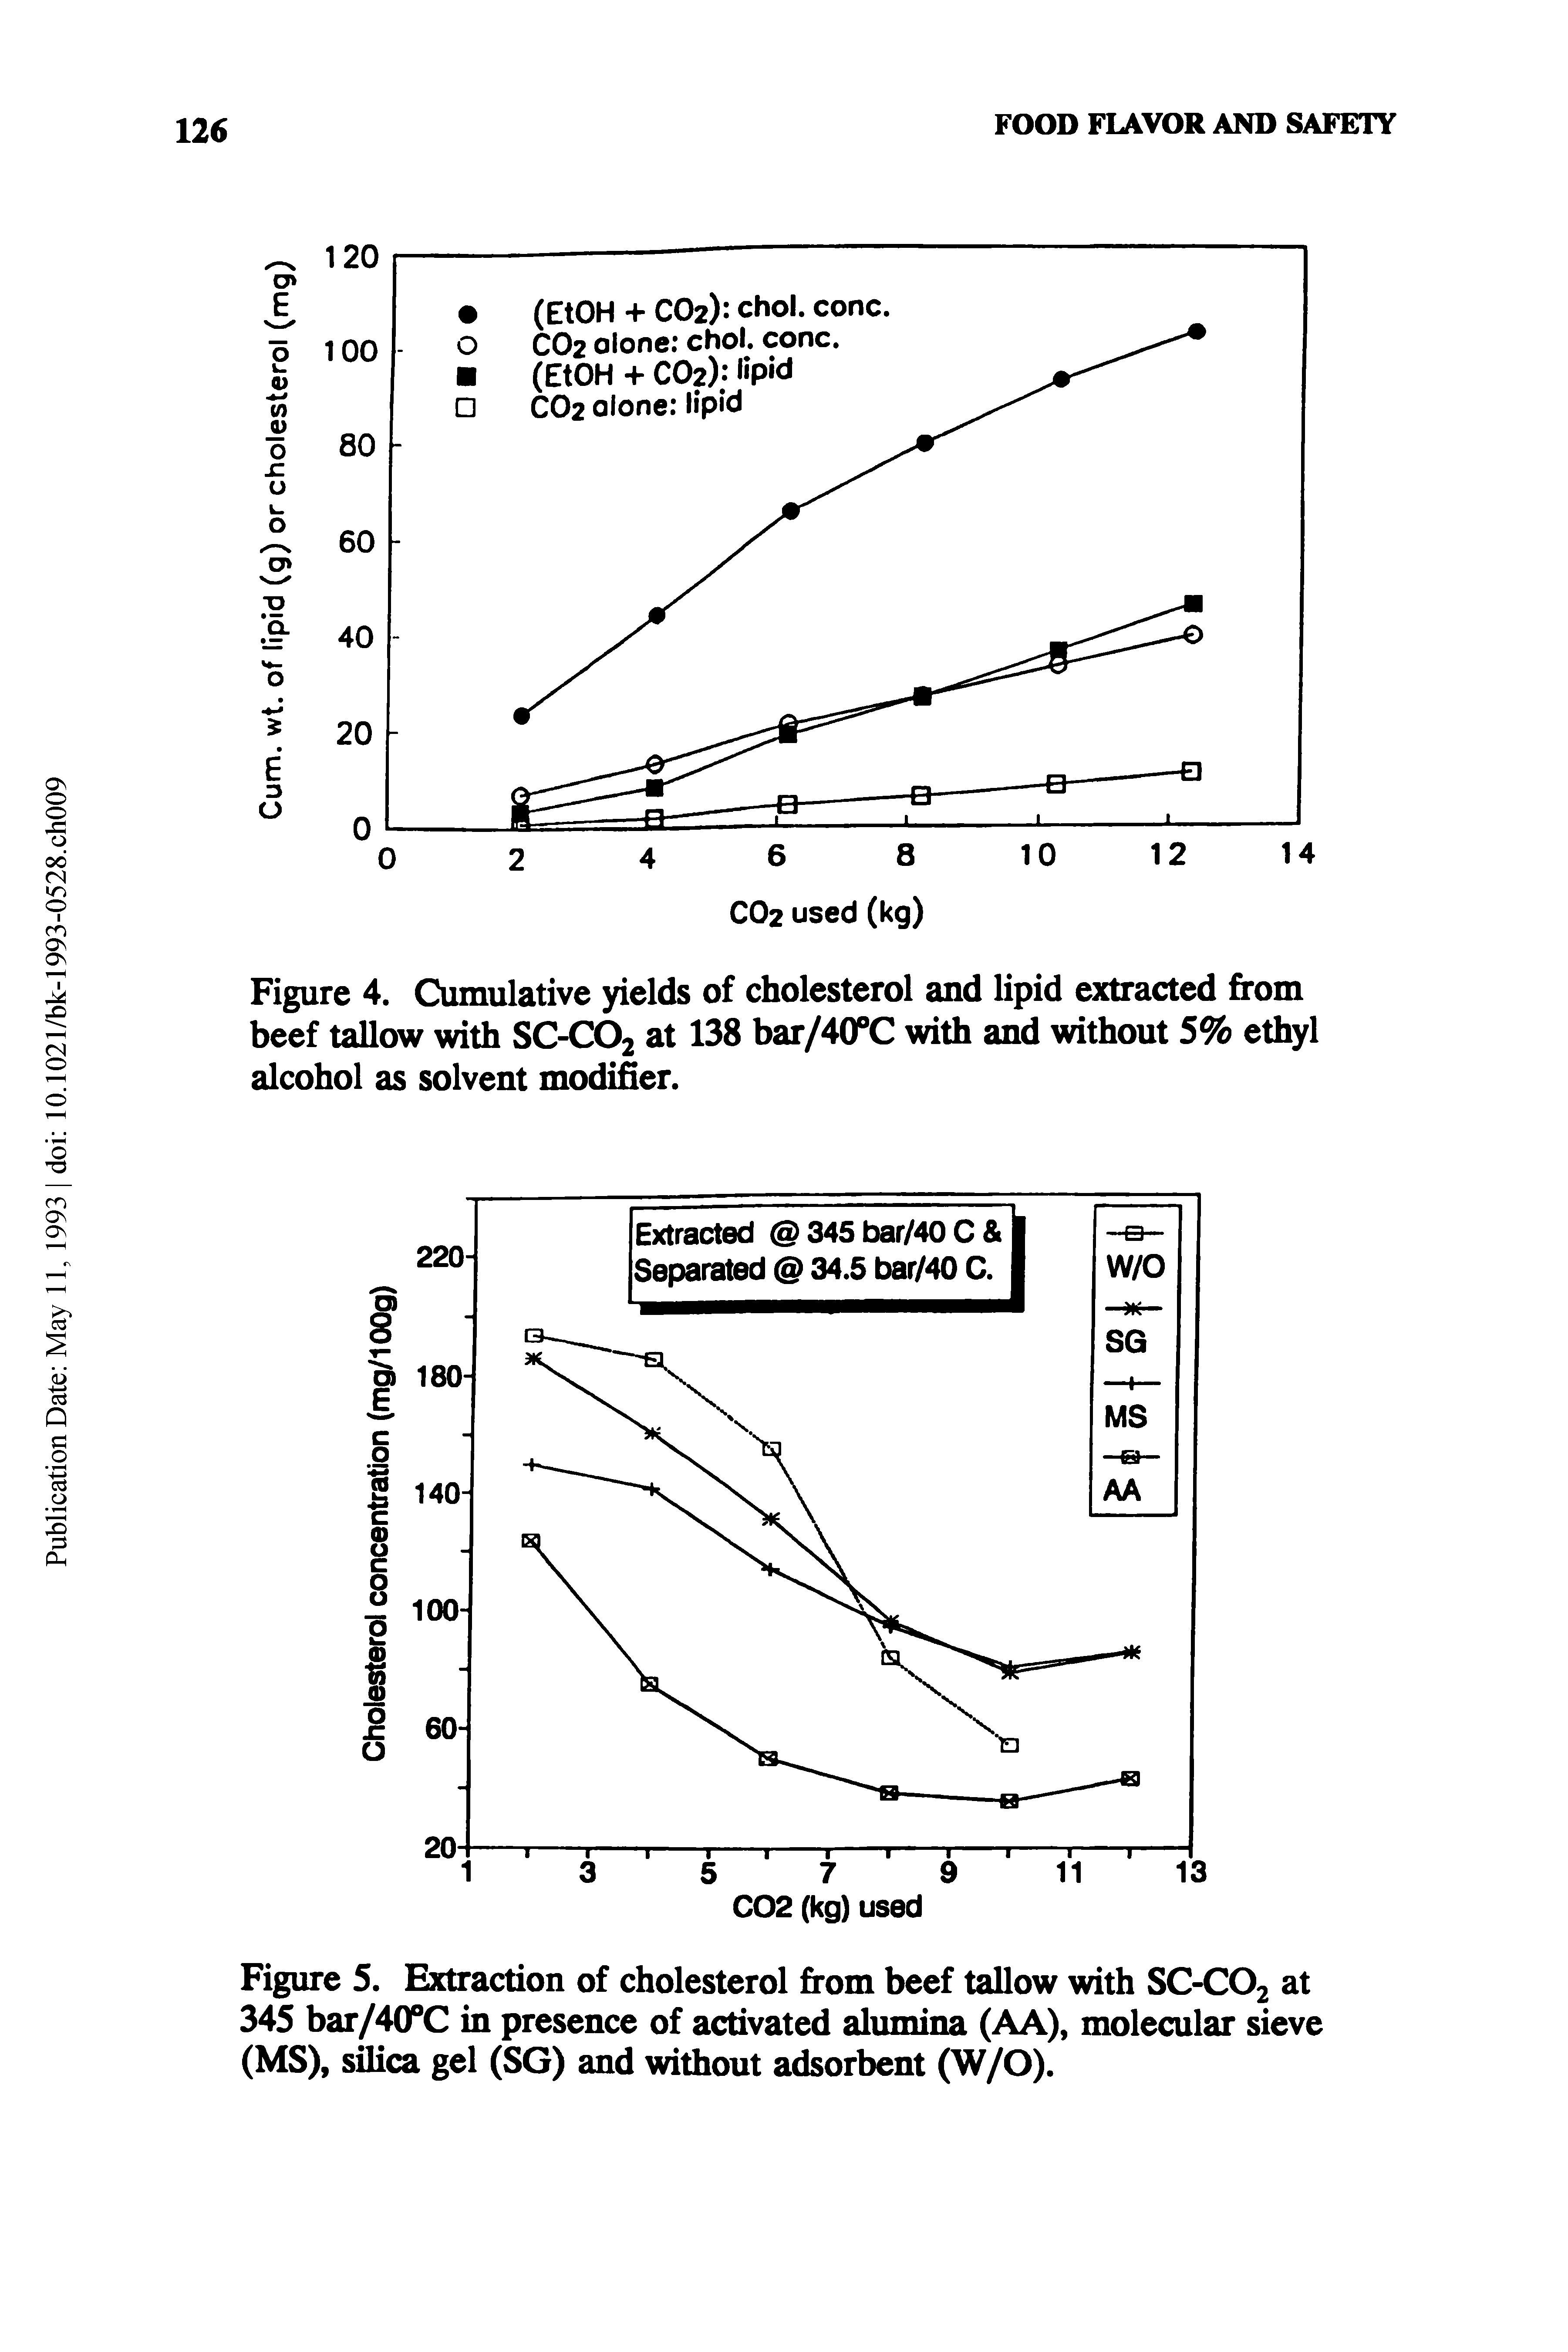 Figure 5. Extraction of cholesterol from beef tallow with SC-CO2 at 345 bar/40 C in presence of activated alumina (AA), molecular sieve (MS), silica gel (SG) and without adsorbent (W/O),...